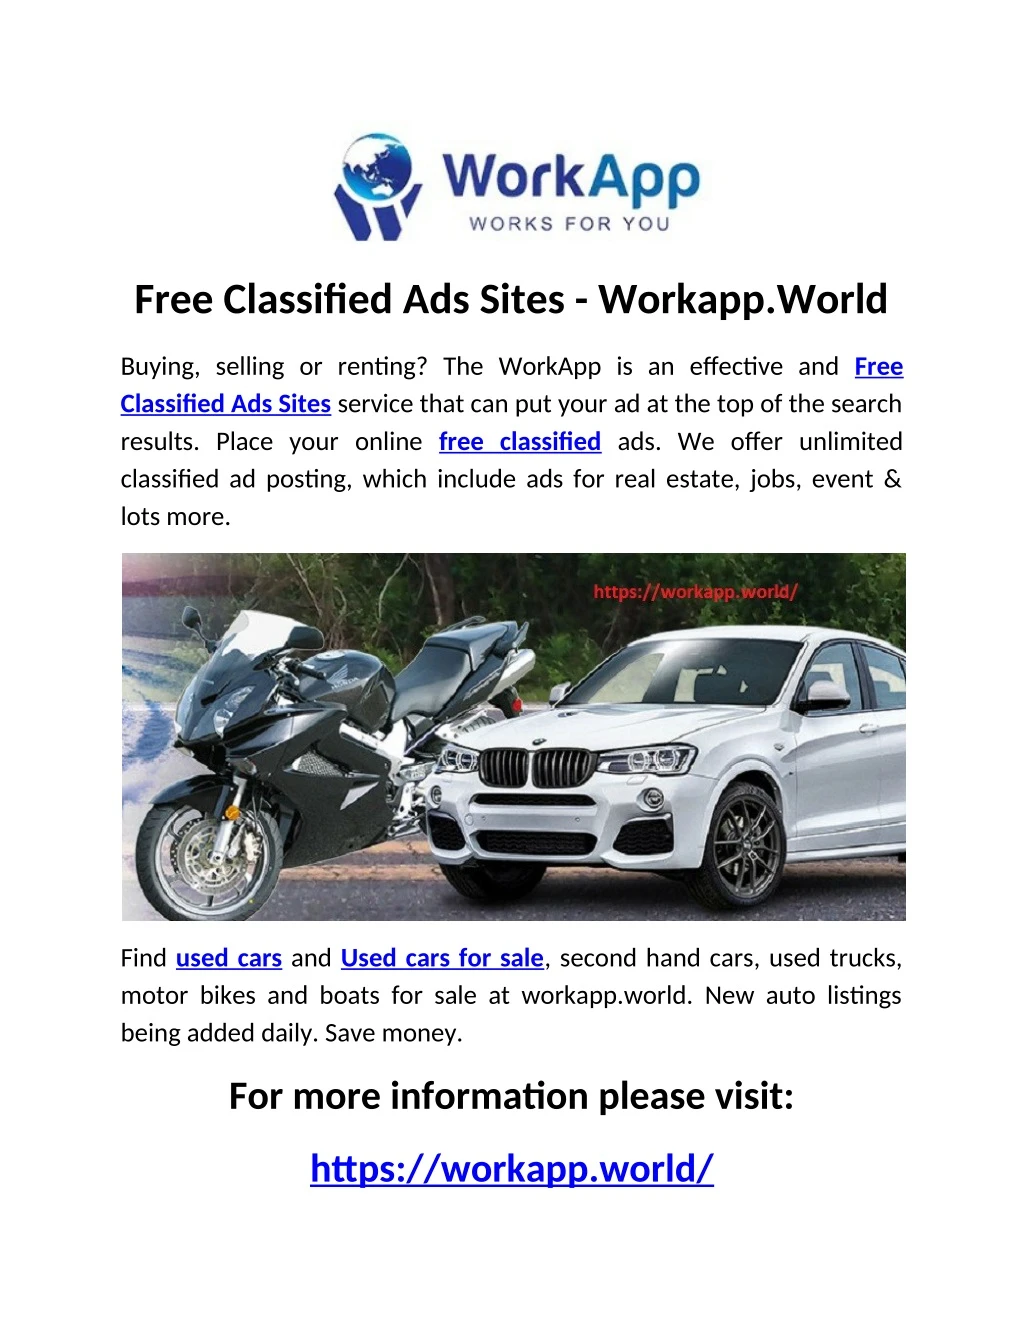 free classified ads sites workapp world